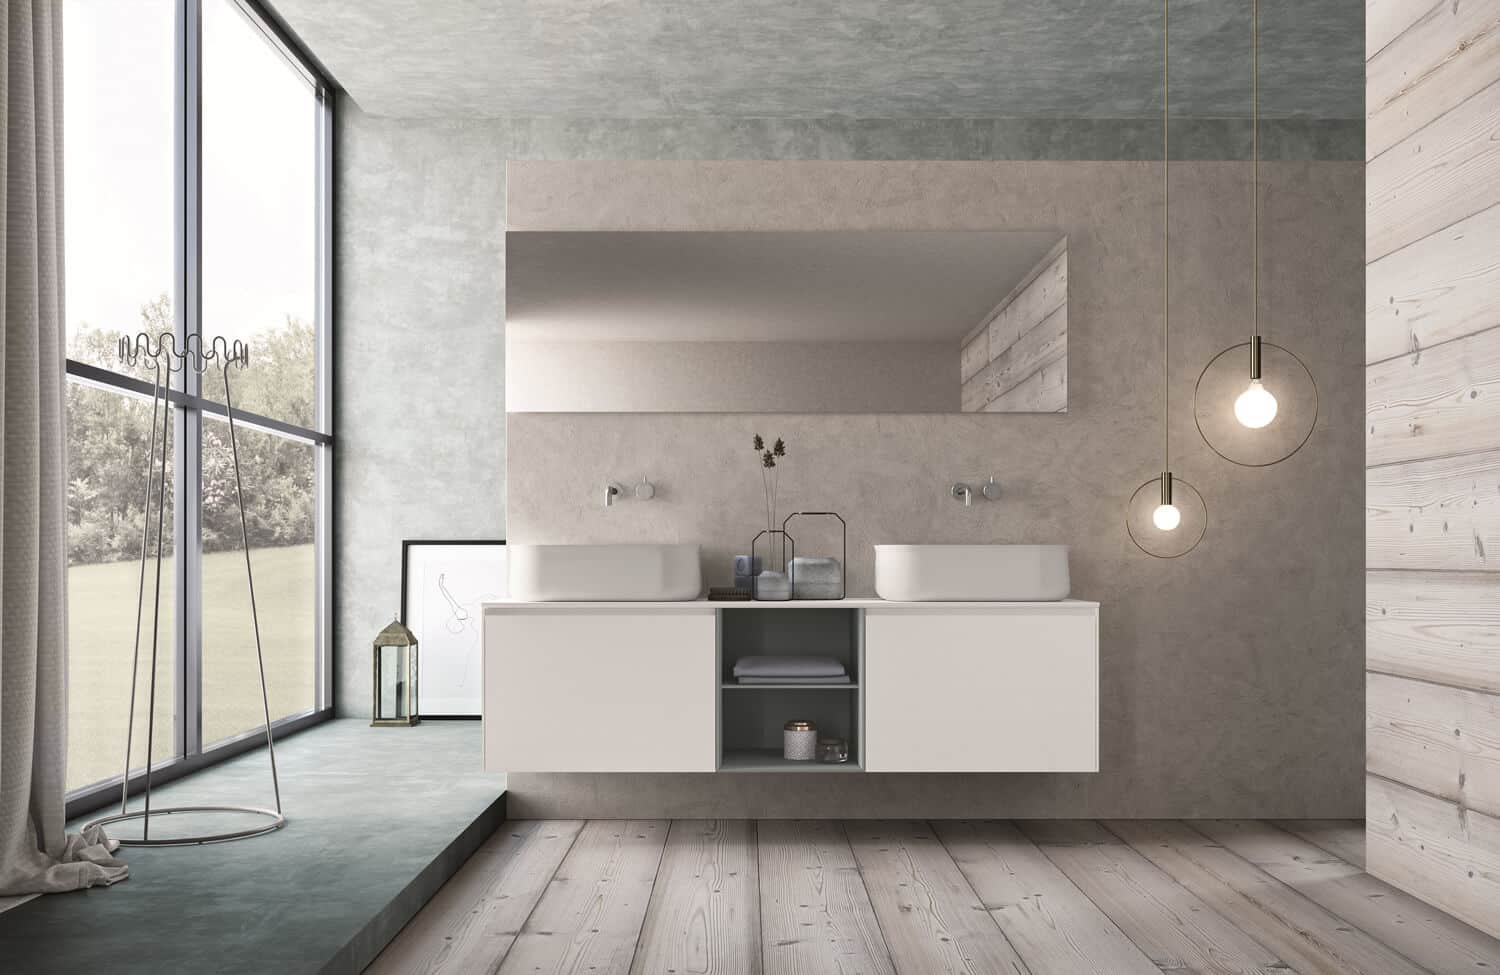 Cabinets in Bianco Stone HPL with open shelves in Azzurro Balena lacquer. Premium mirror. Flûte washbasins.